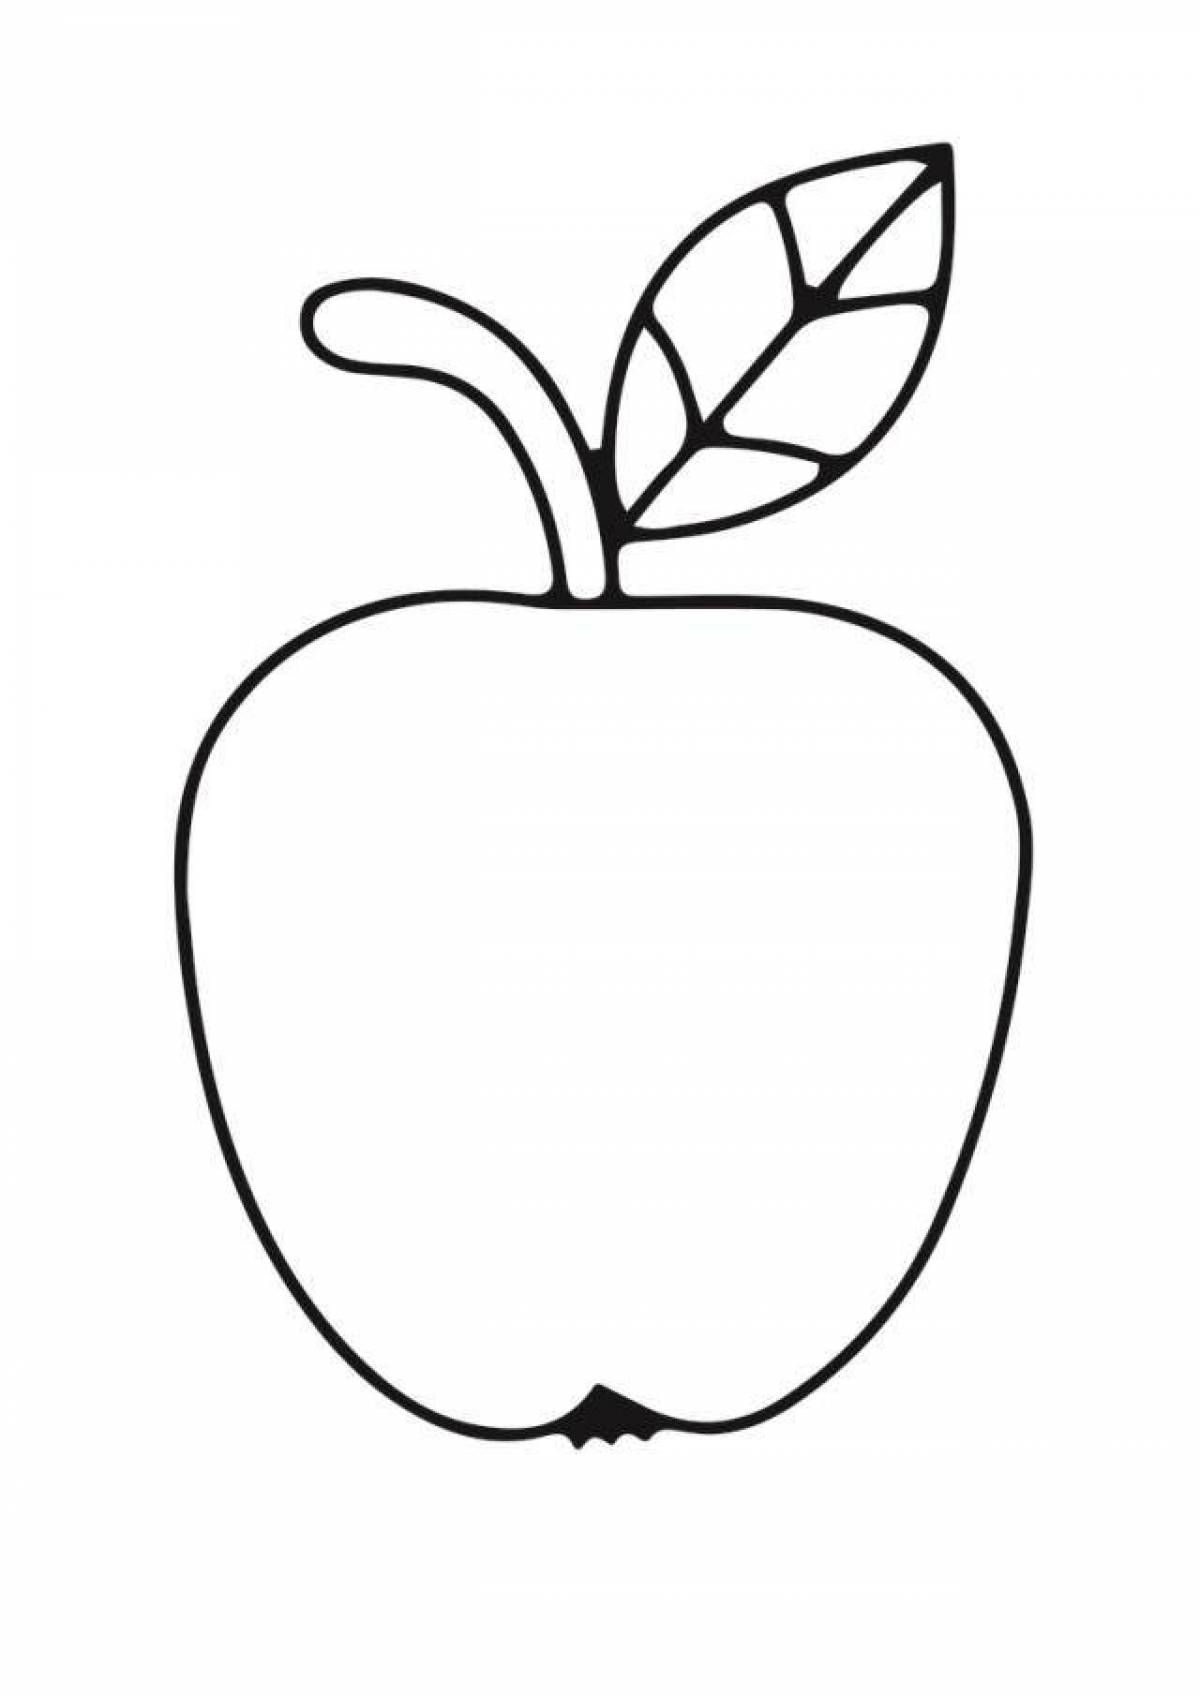 Creative apple coloring book for kids